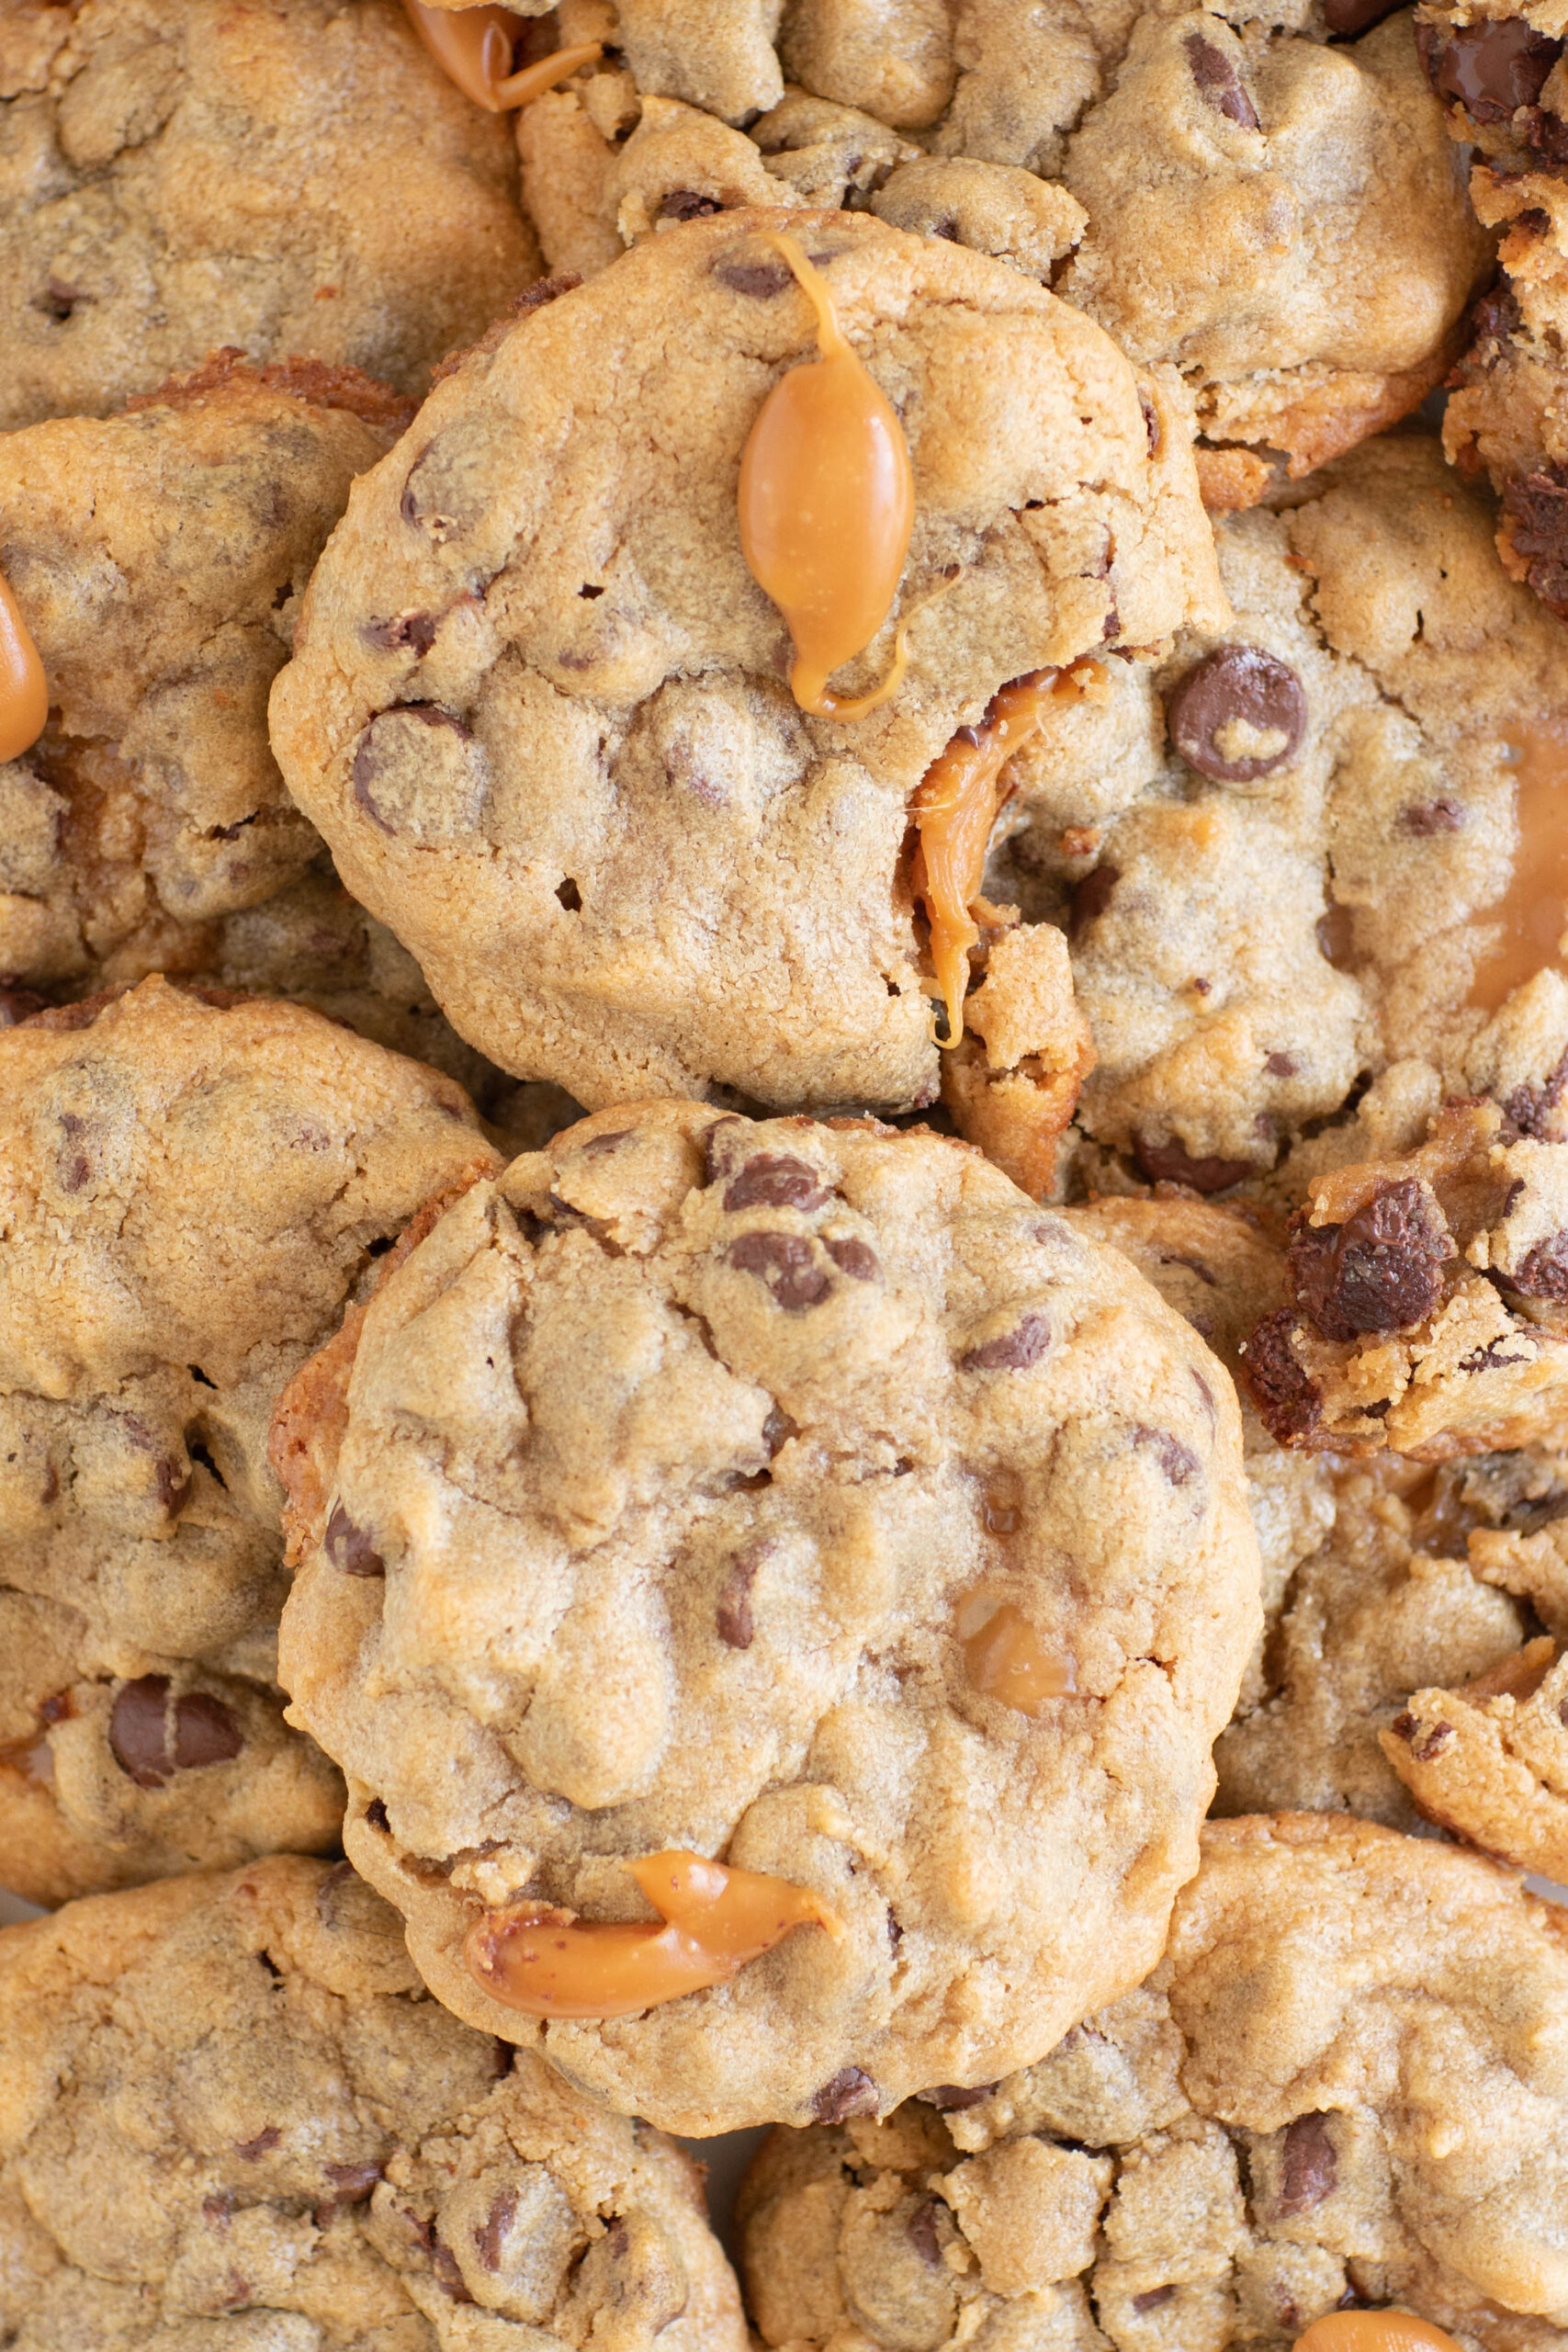 over the top view of chocolate chip cookies with caramel oozing out